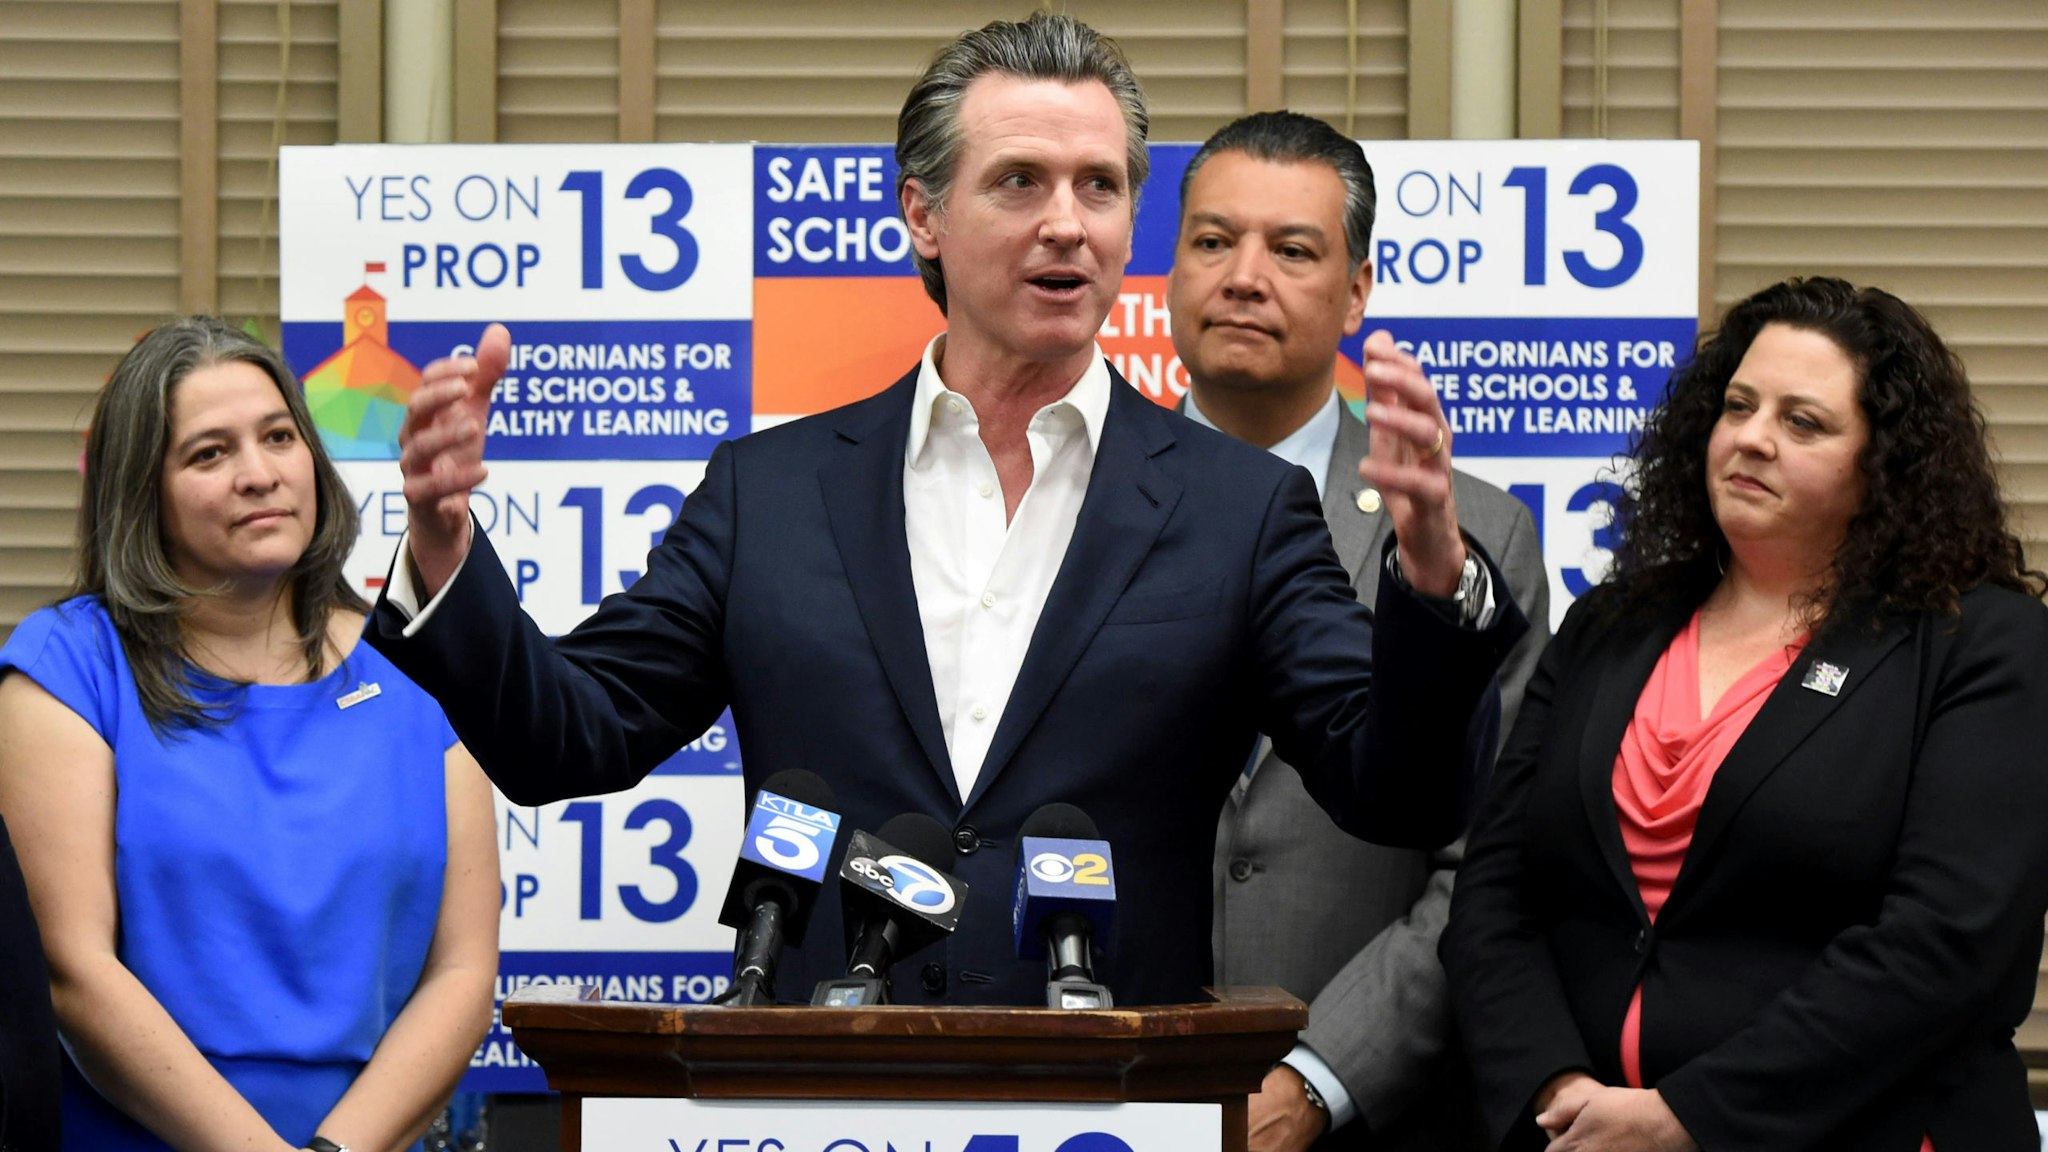 LONG BEACH, CA - FEBRUARY 28: California Governor Gavin Newsom, toured Mark Twain Elementary School before holding a press conference to promote support for Proposition 13, the historic school facilities bond, in Long Beach on Friday, February 28, 2020.